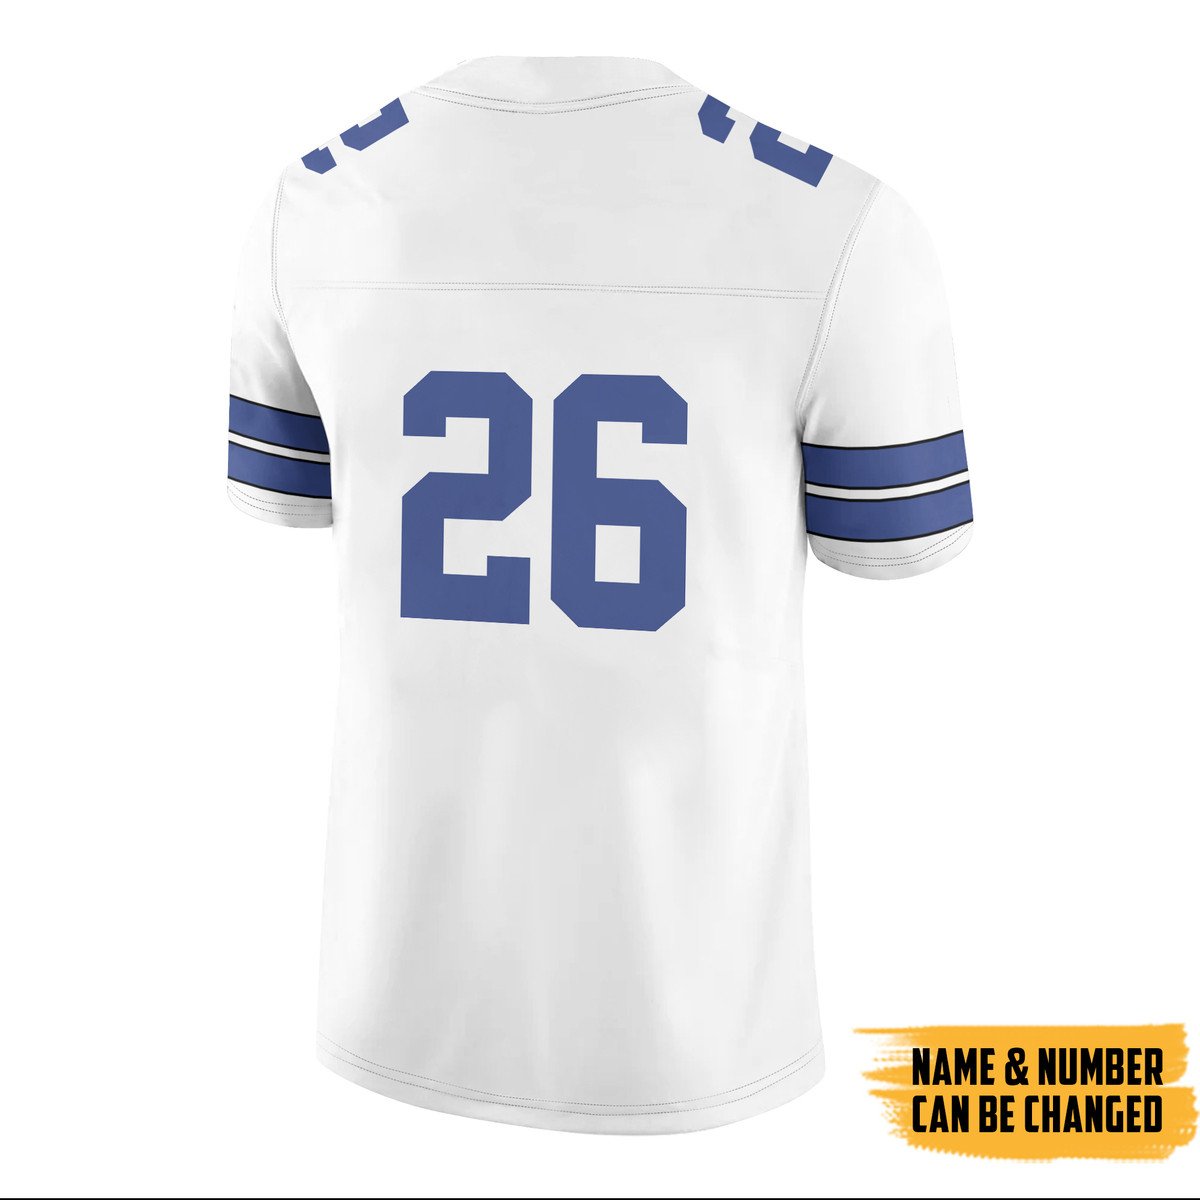 TOP Dallas Cowboyy Personalized Custom Football All Over Print Jersey 5